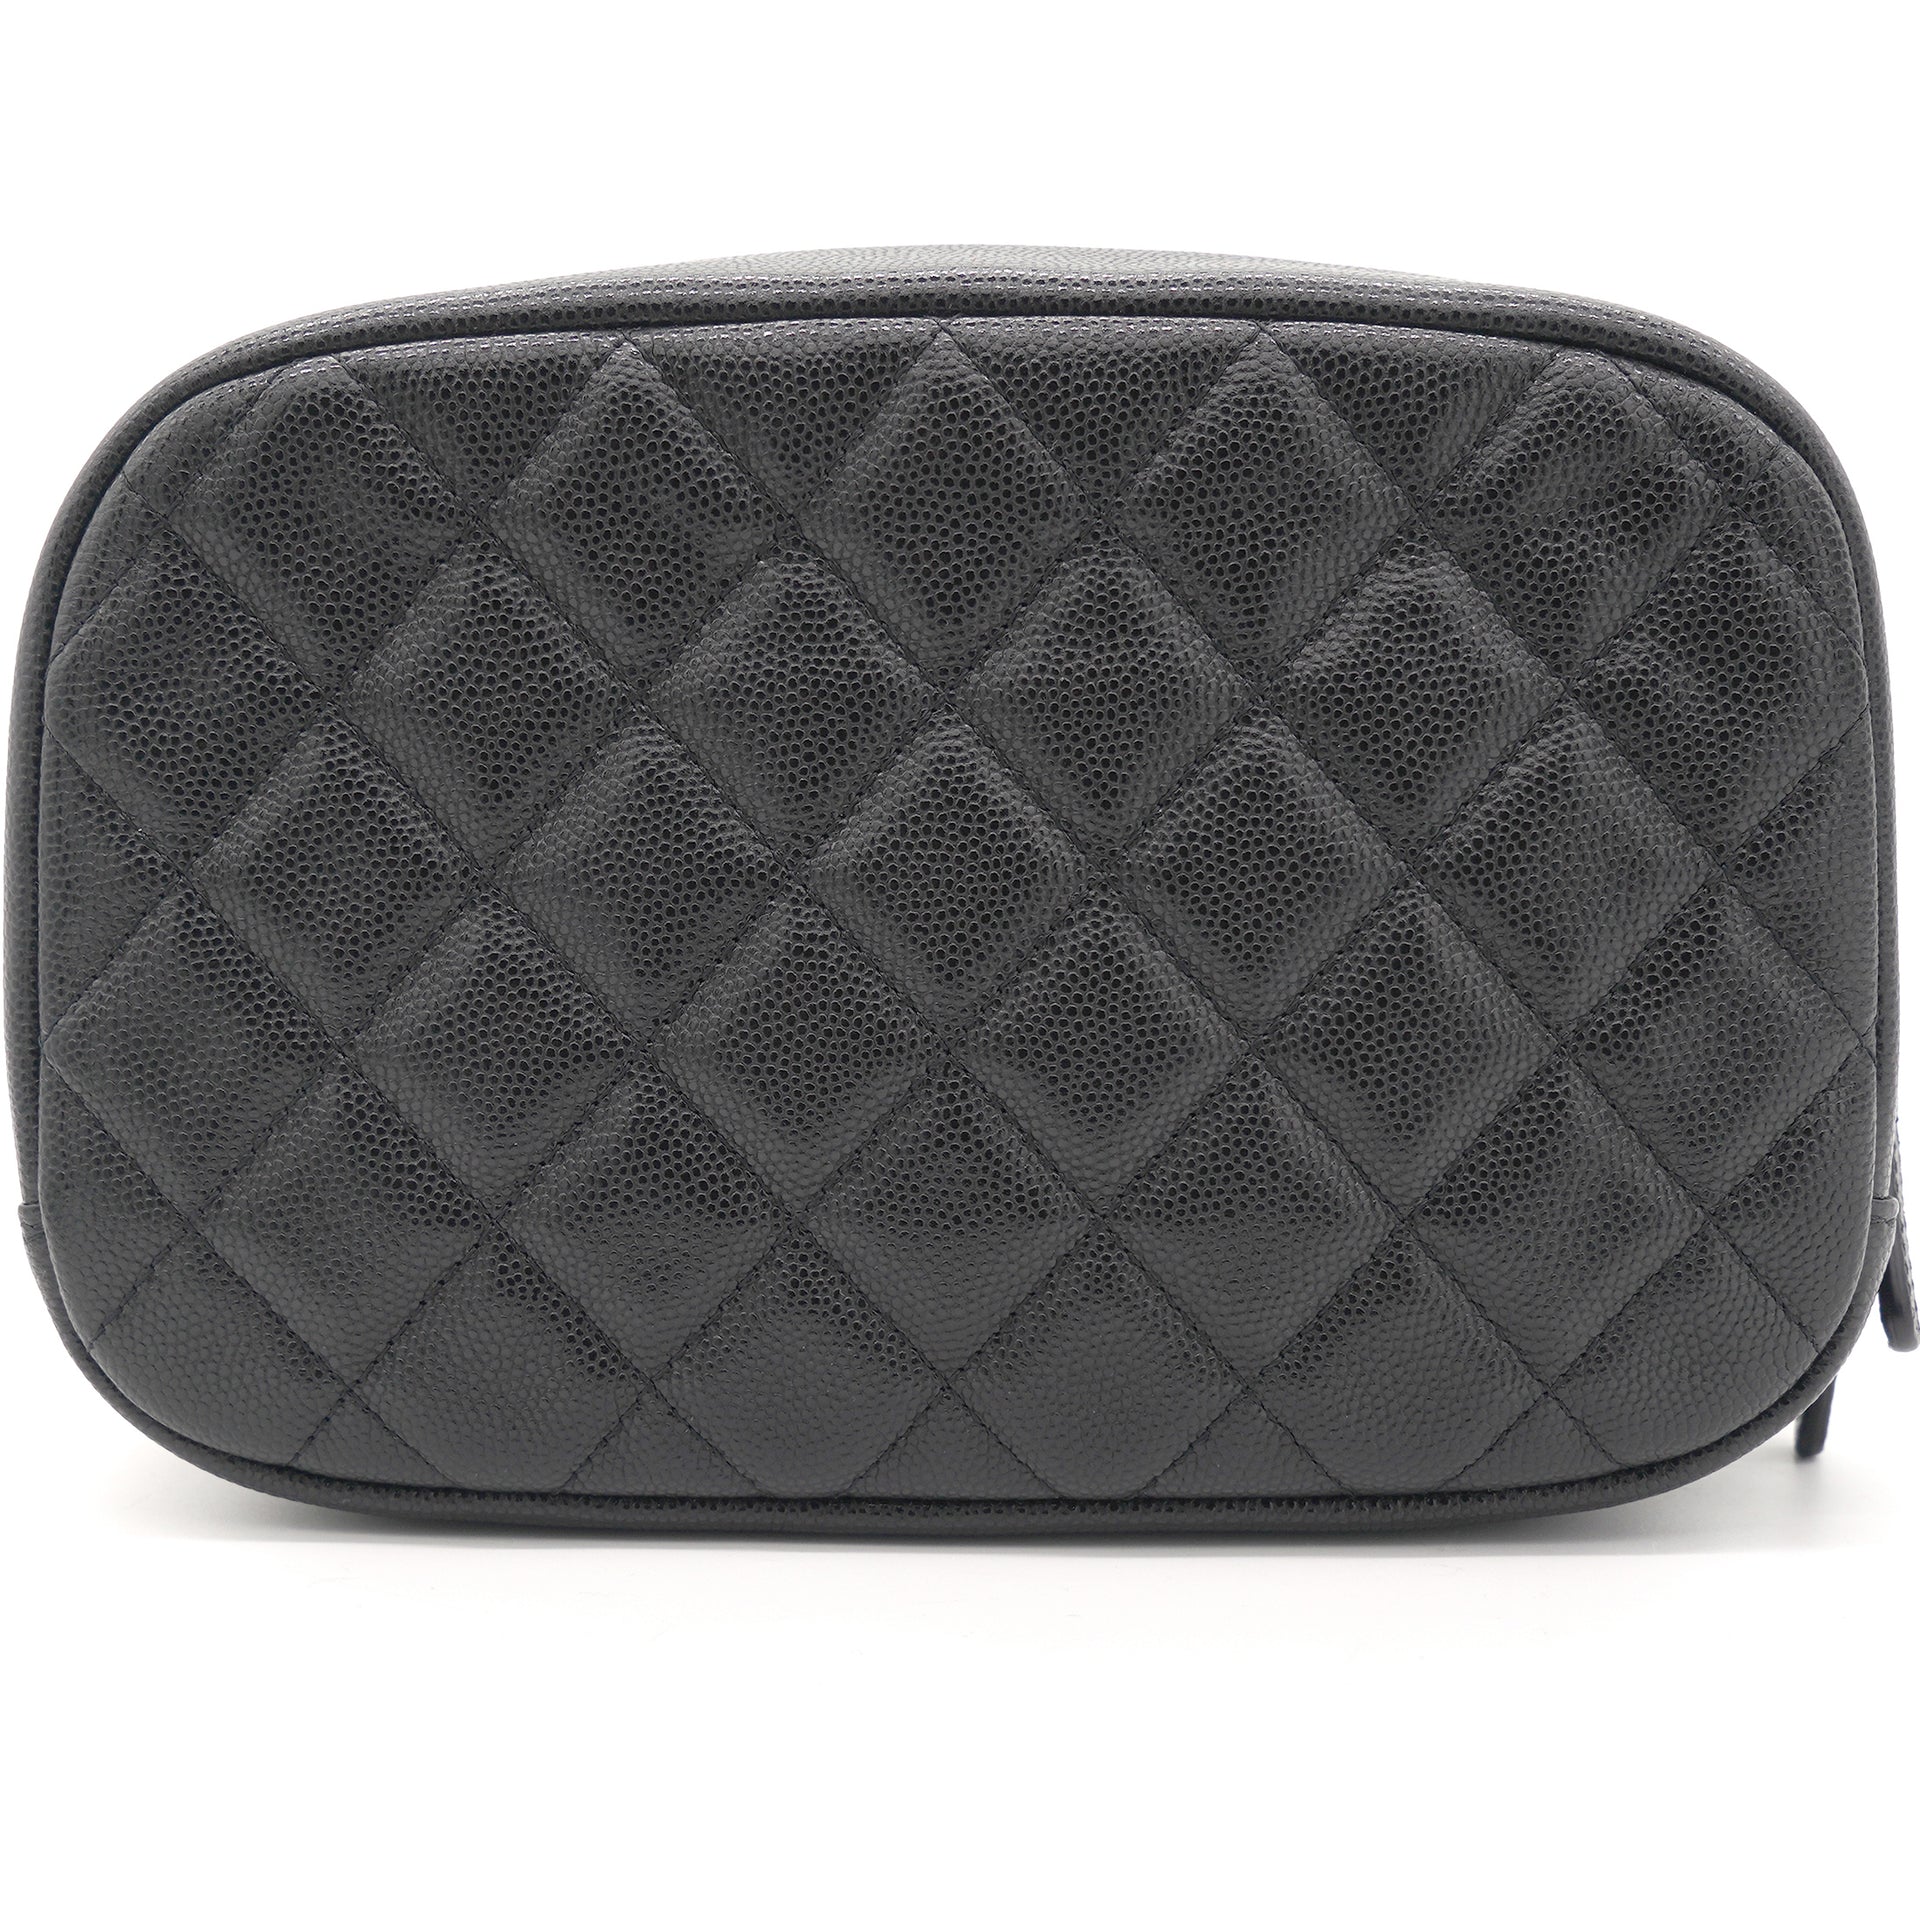 Caviar Quilted Curvy Pouch Cosmetic Case Black